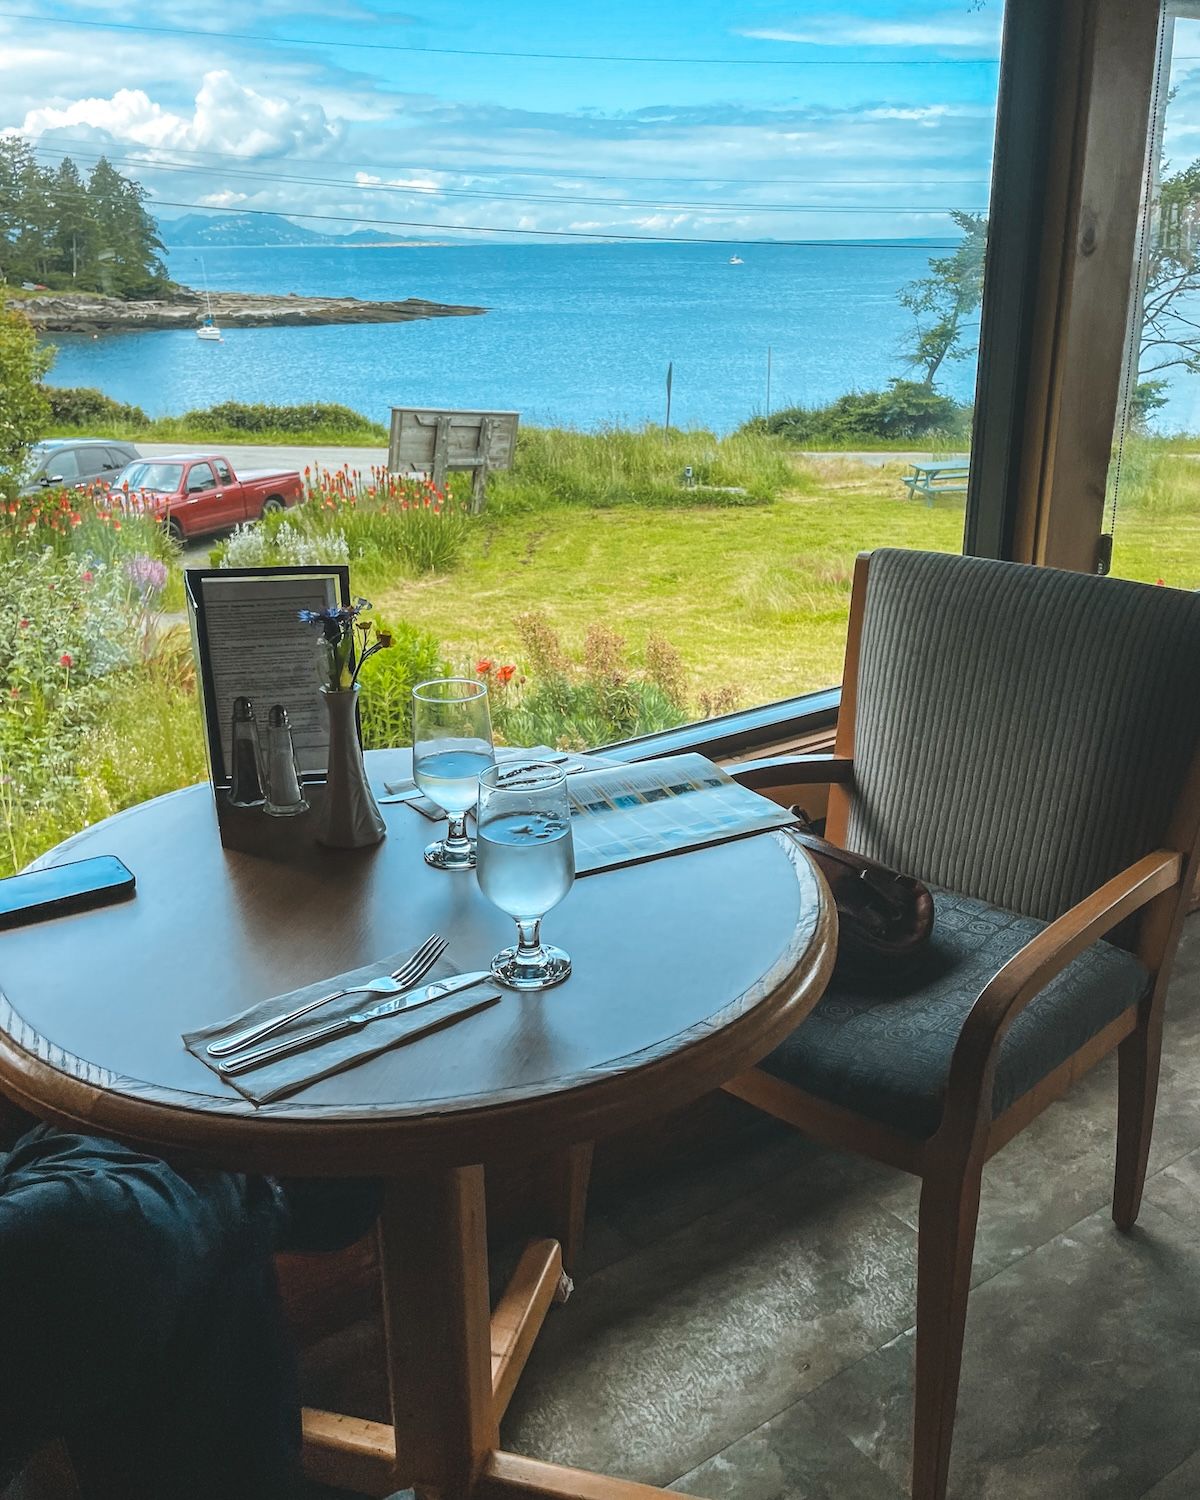 Round table and chair against a window with green grass and the ocean as the backdrop at the Surf Lodge dining room